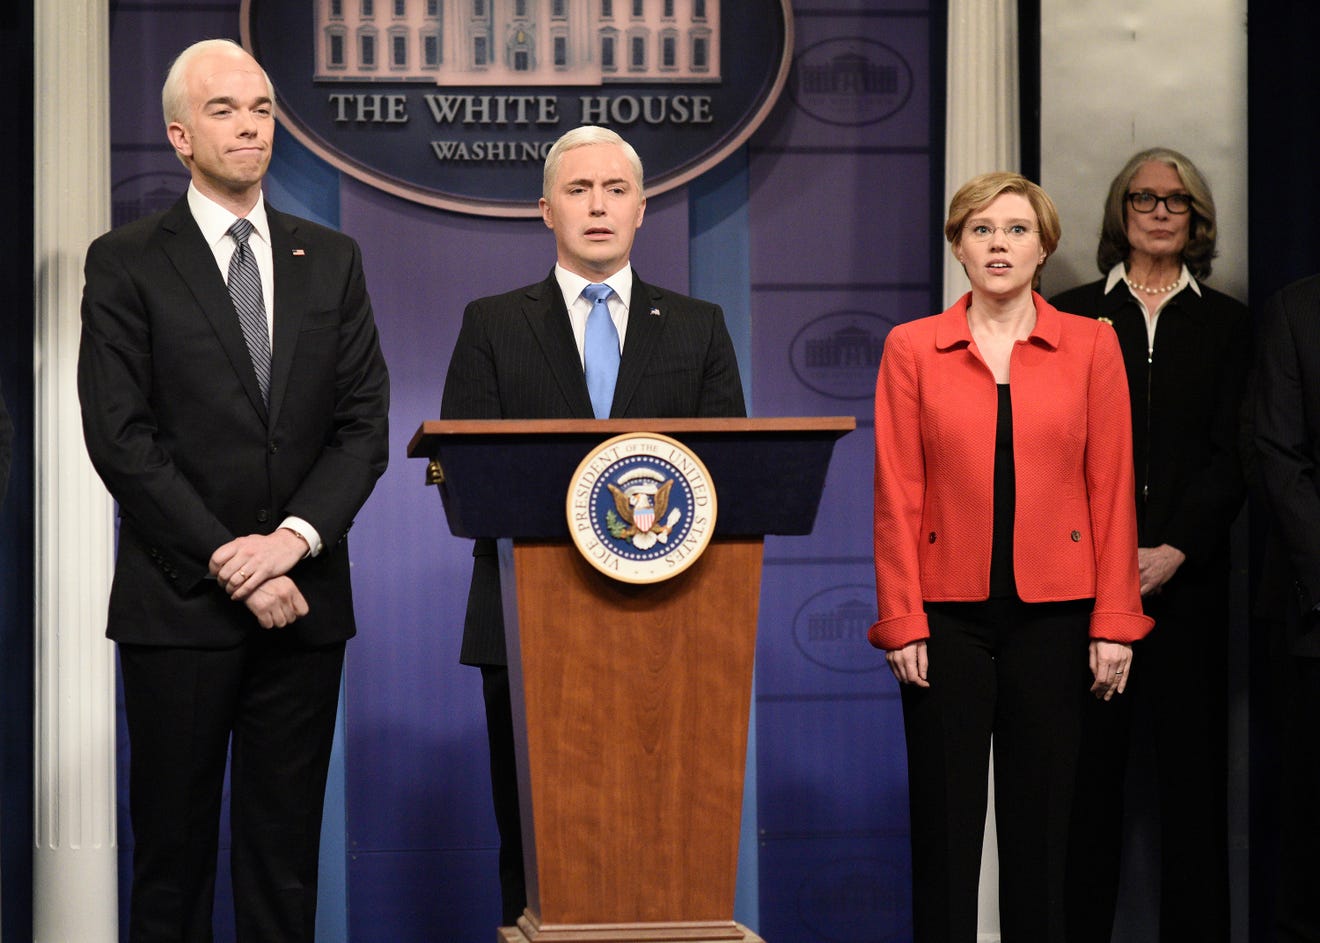 "Saturday Night Live" is in its 45th season: The show's Feb. 29 episode kicked off with a mock press conference on the coronavirus, with host John Mulaney as Joe Biden, Beck Bennett as Mike Pence, and Kate McKinnon as Elizabeth Warren.